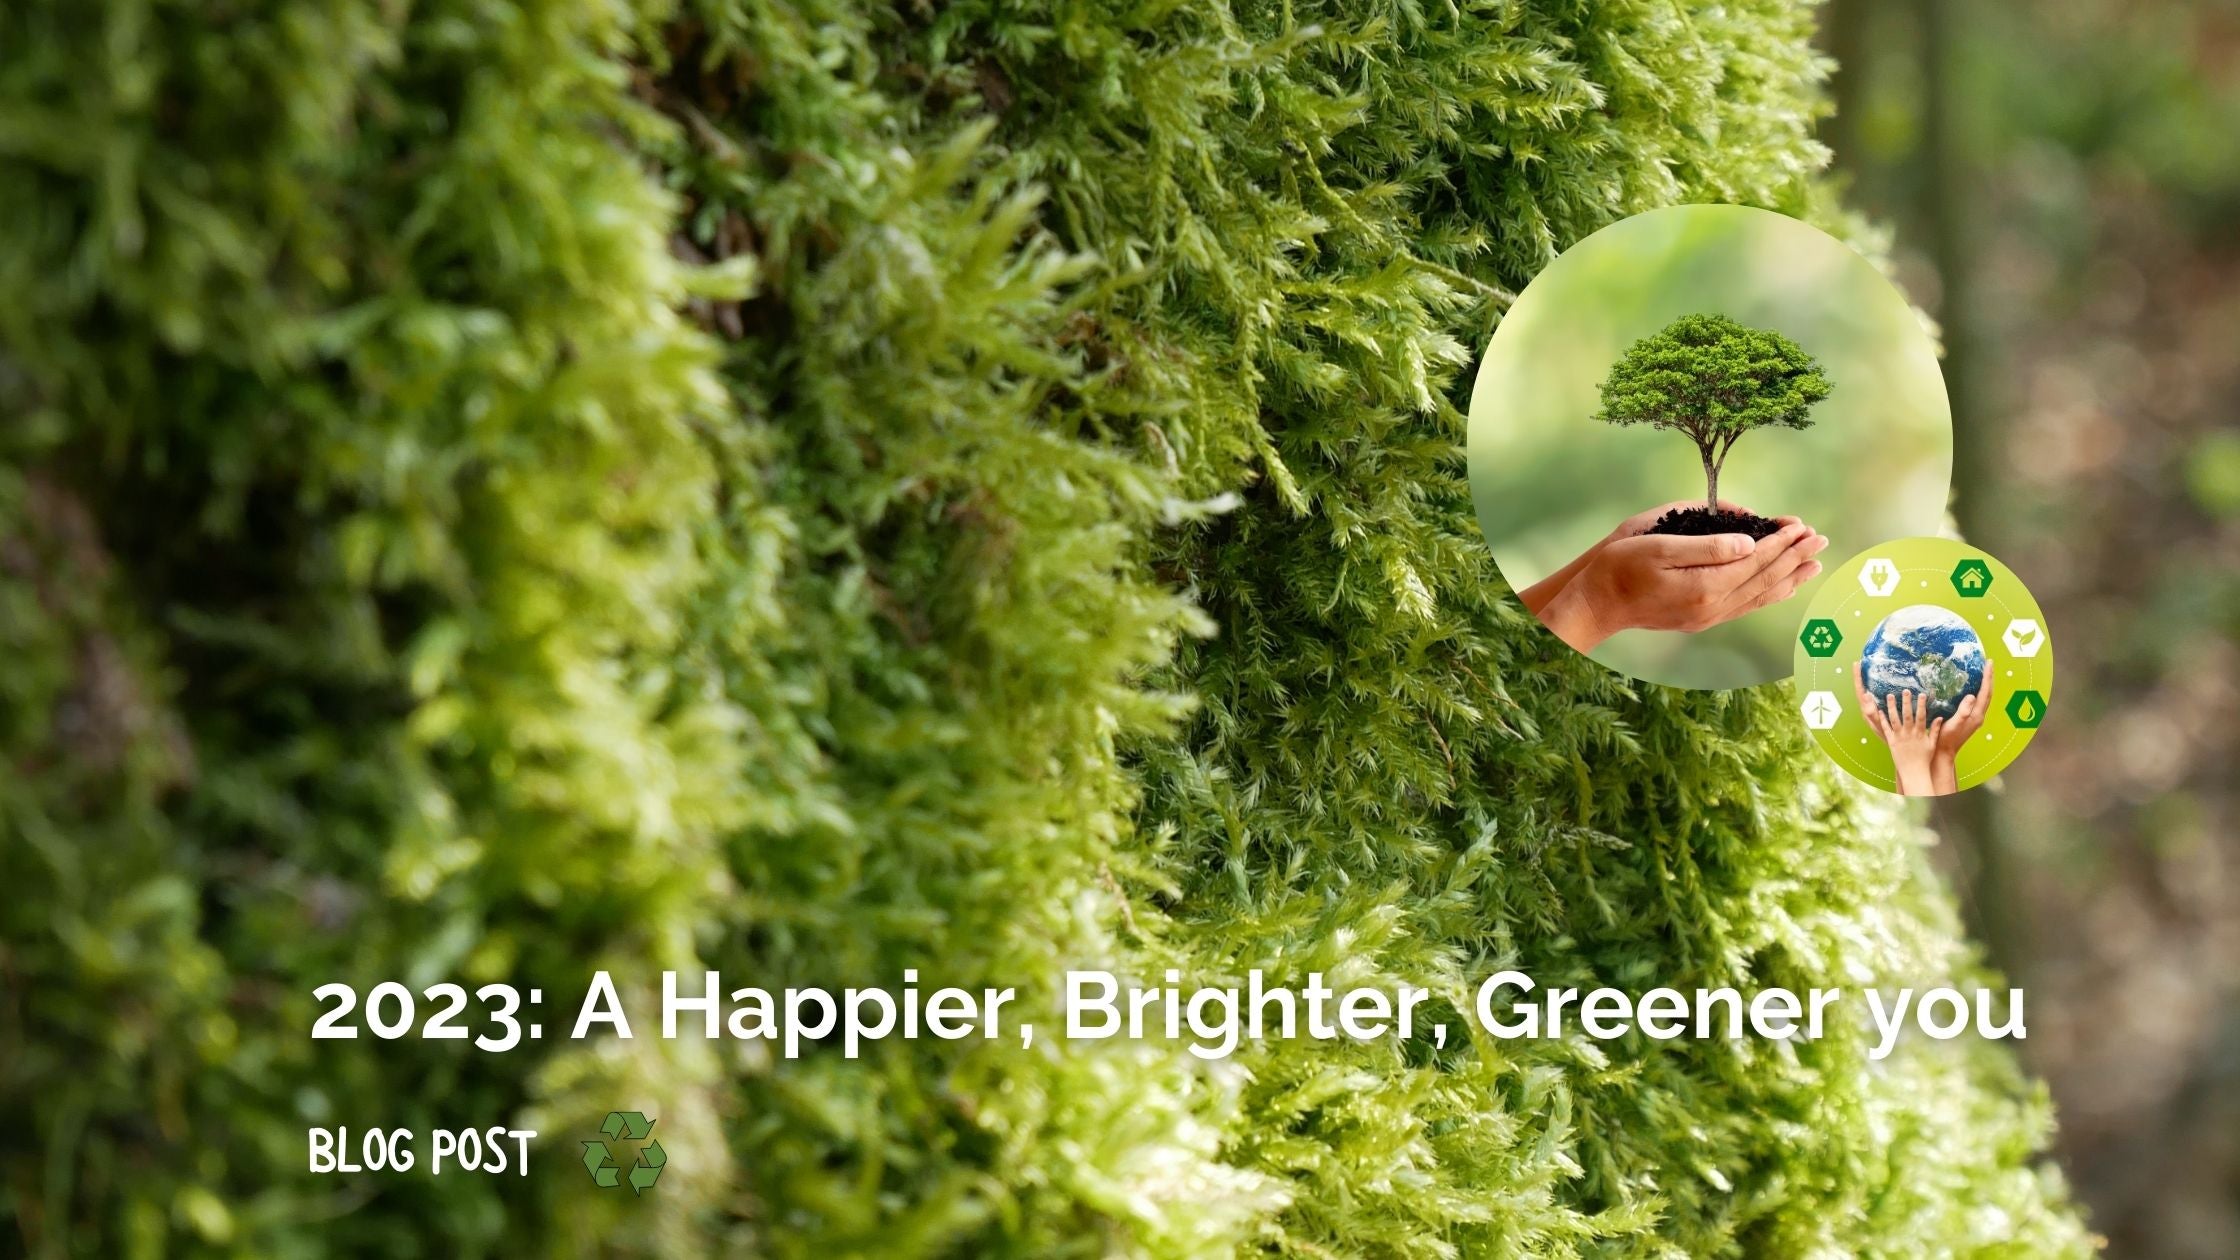 2023: A Happier, Brighter, Greener you